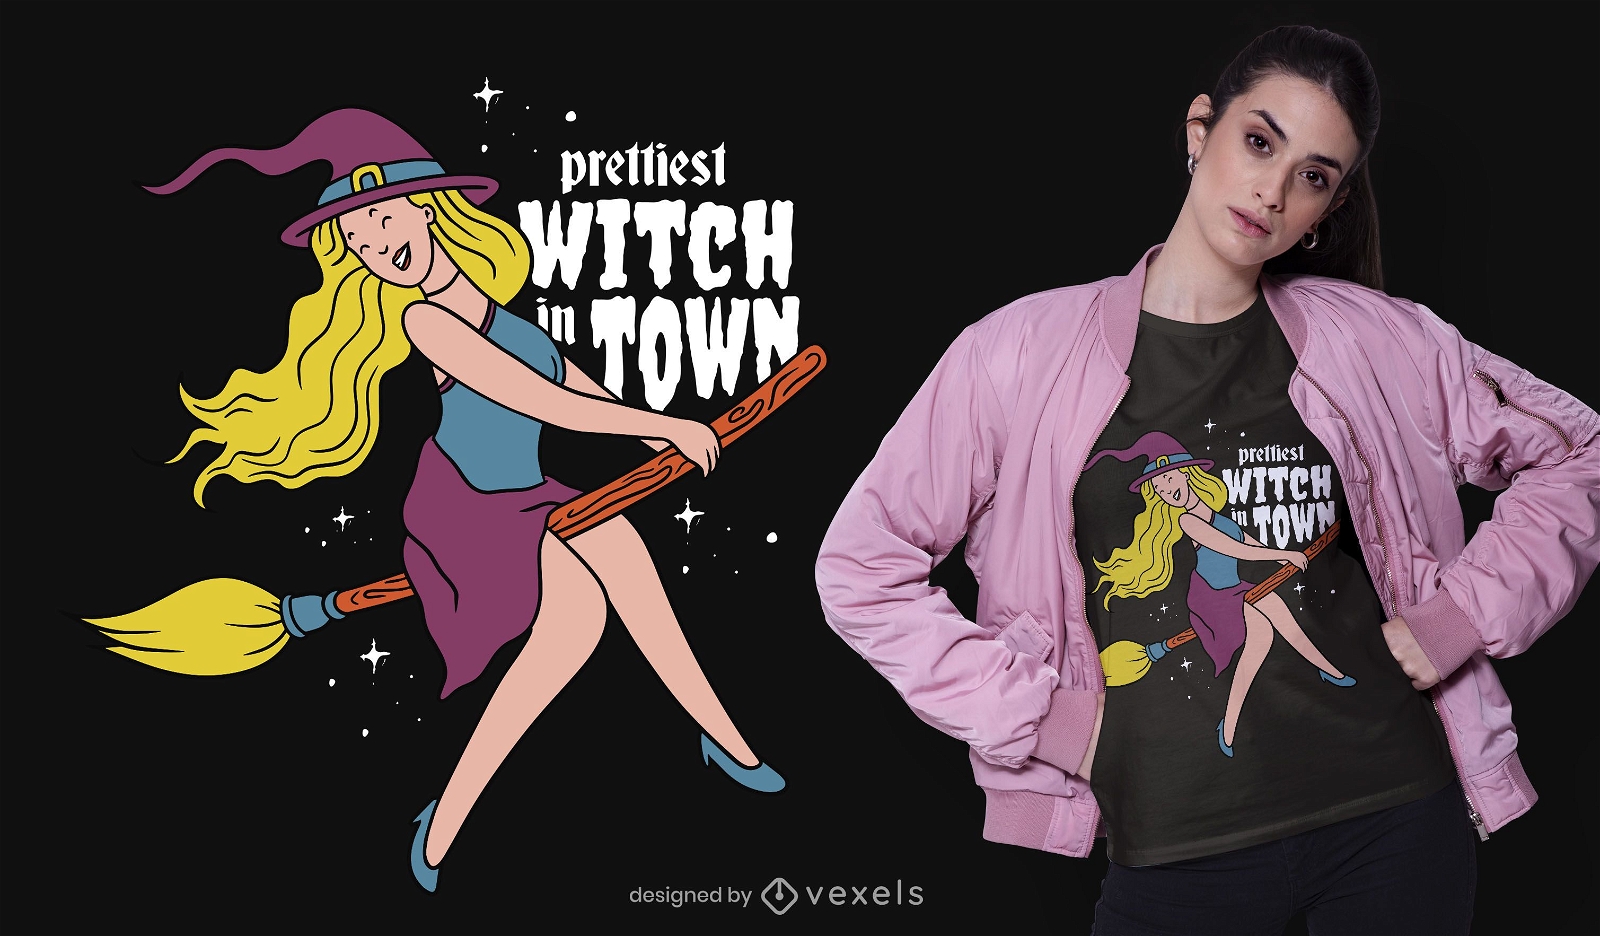 Prettiest witch in town t-shirt design